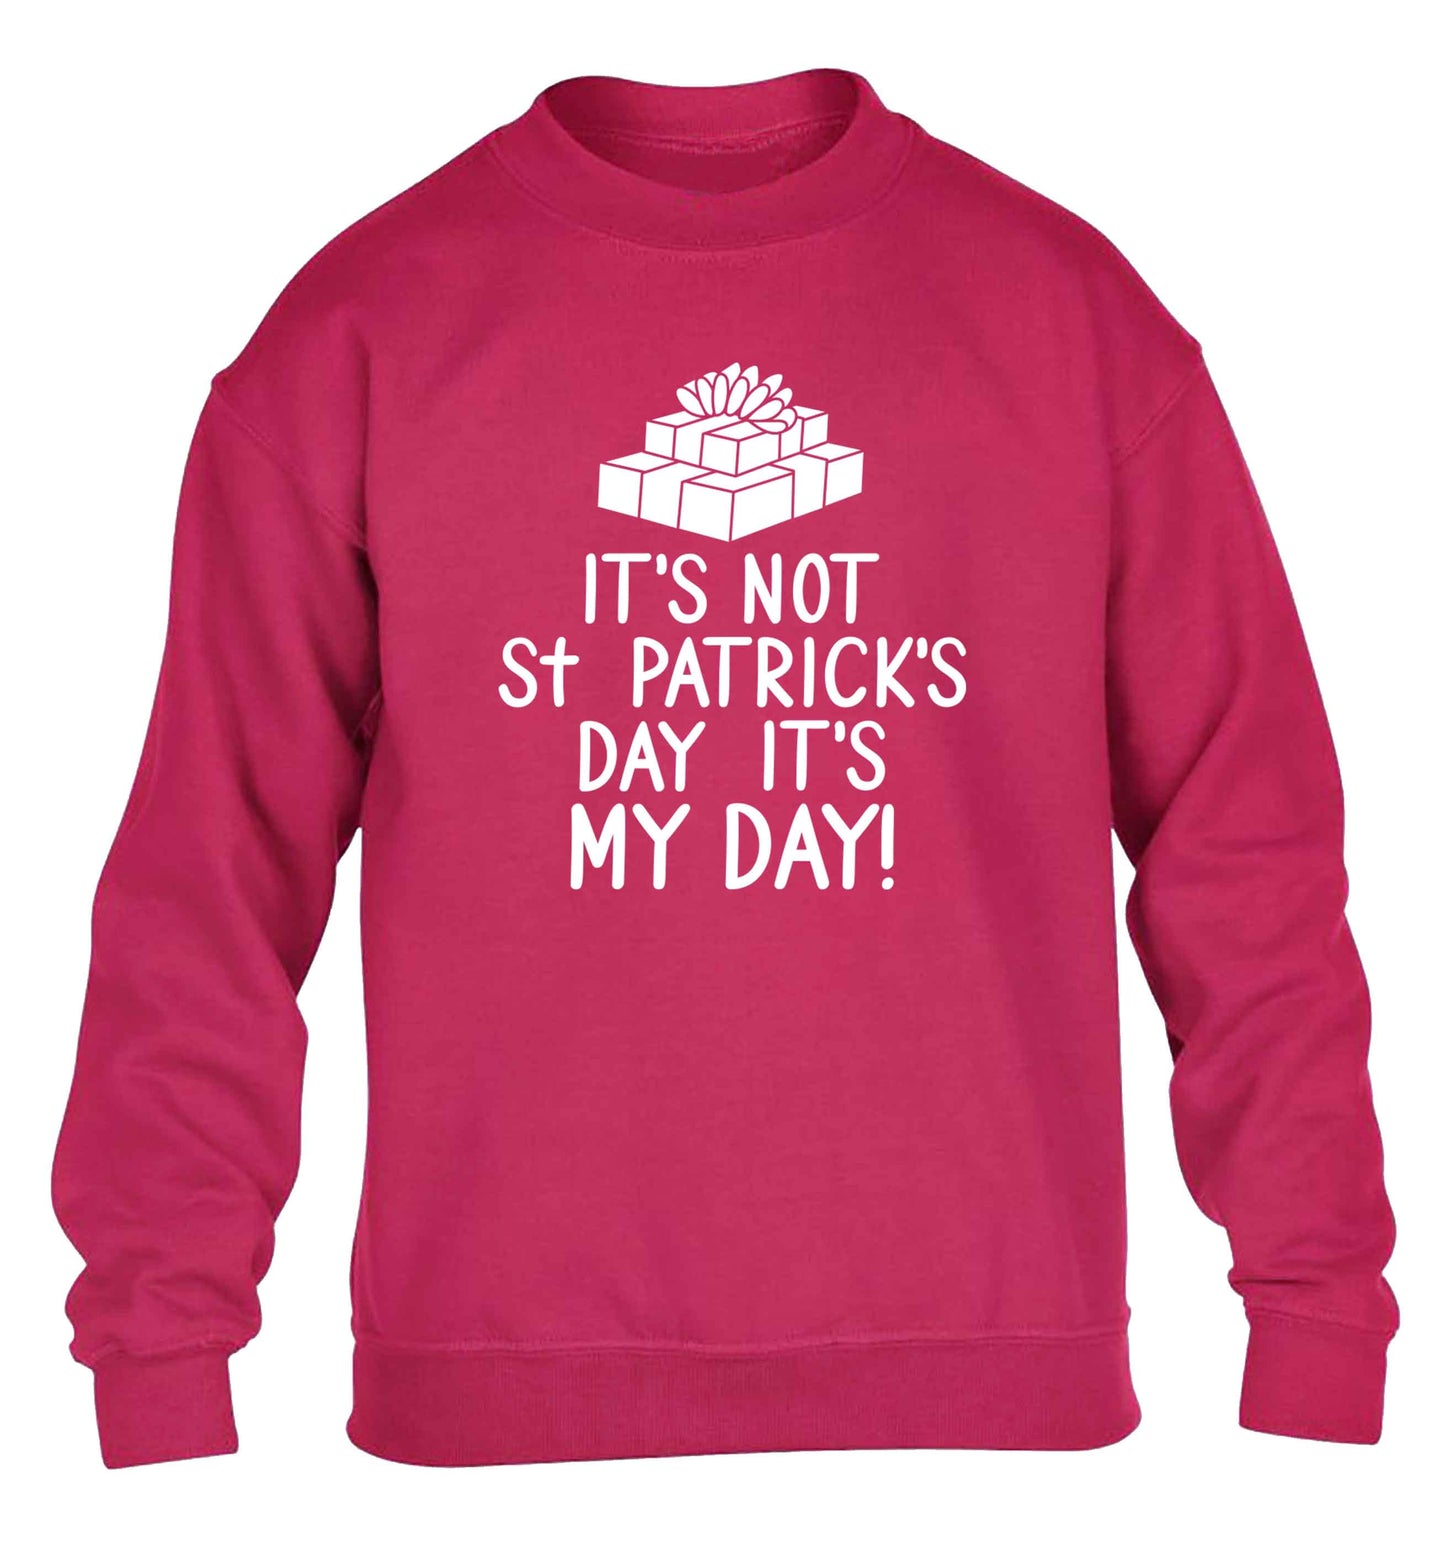 Funny gifts for your mum on mother's dayor her birthday! It's not St Patricks day it's my day children's pink sweater 12-13 Years